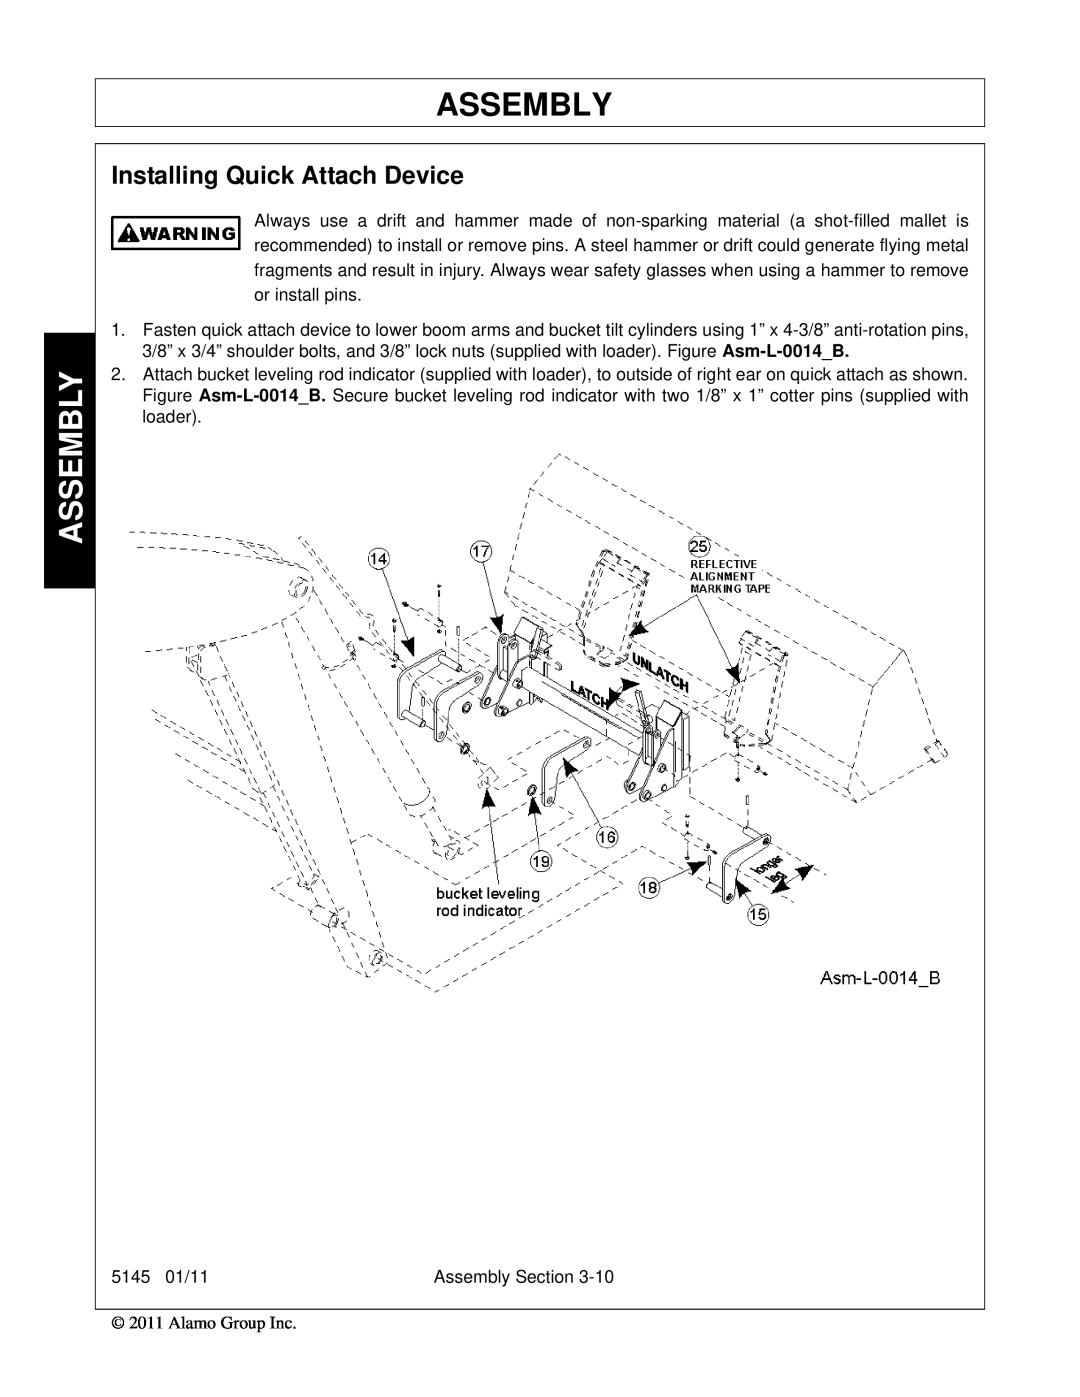 Bush Hog 5145 manual Assembly, Installing Quick Attach Device 